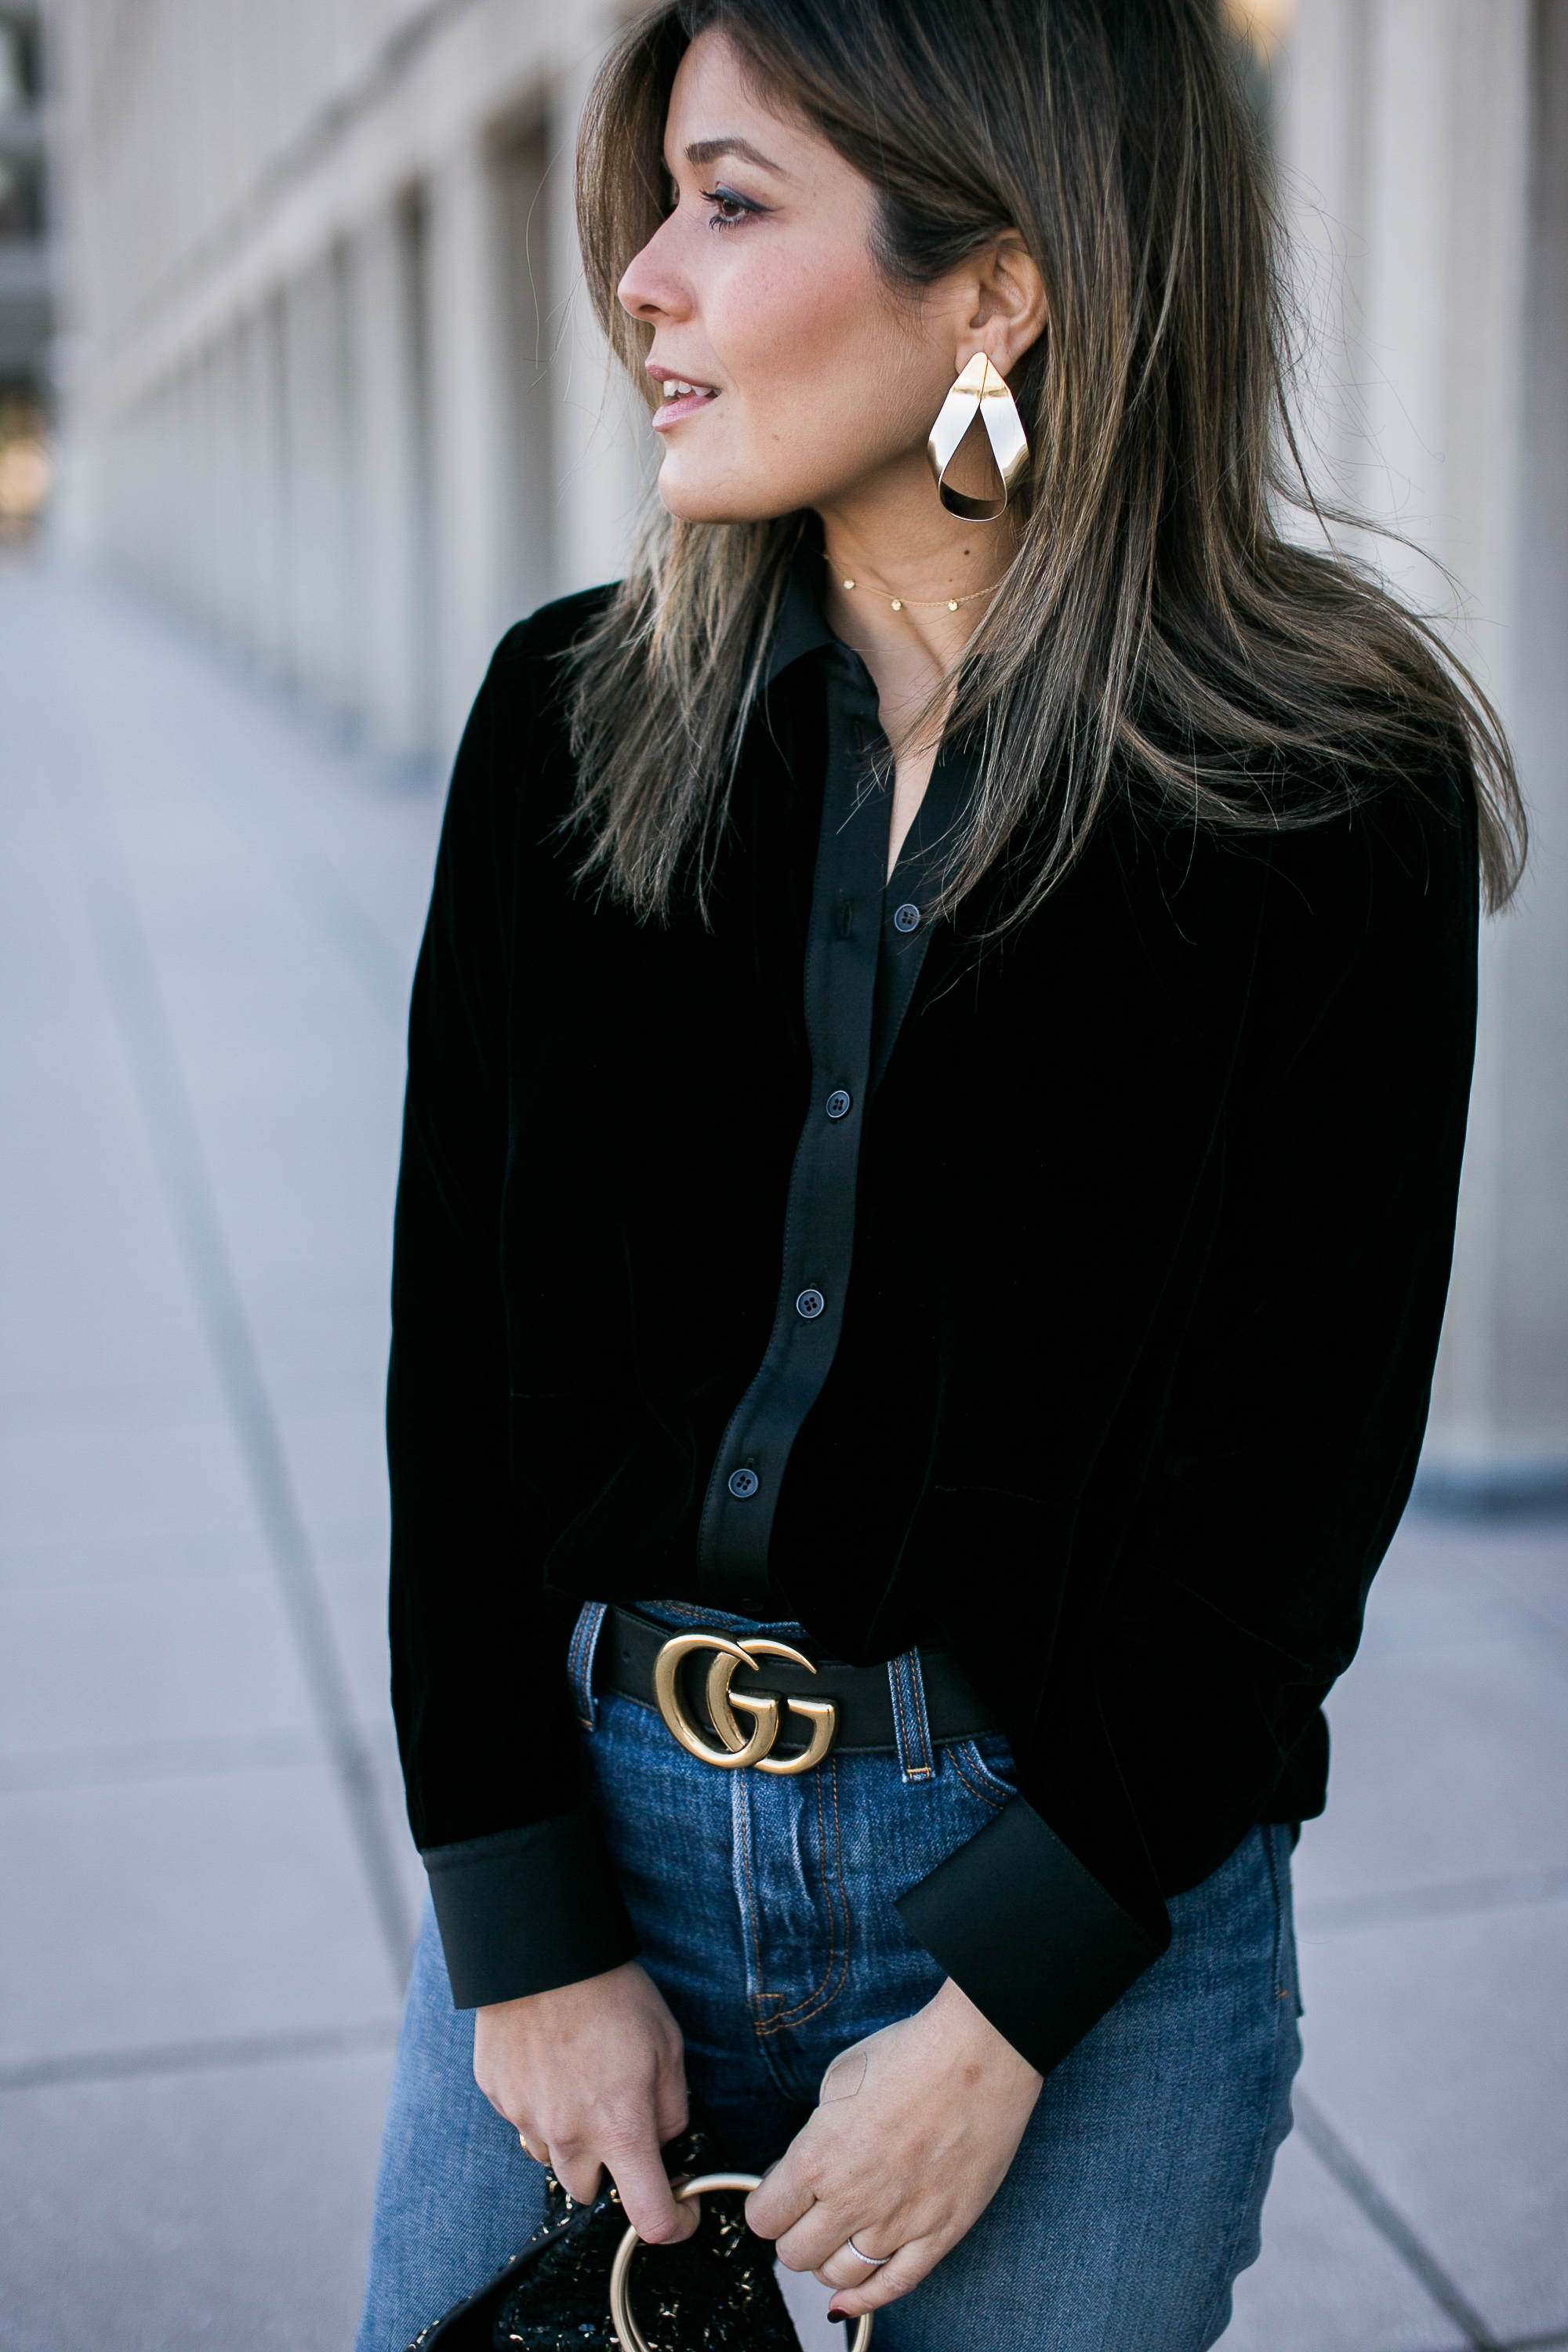 Blogger Sara Azani of Style MBA wearing a black Gucci leather belt with double G buckle, 5 Disc Choker Necklace, Whiting & Davis Fold-Over Tote, LEVI'S Wedgie Skinny Jean, Lafayette 148 New York tweed jacket, and Vince portia point toe pump as part of her black and gold look in front of a stone building in Washington, DC.